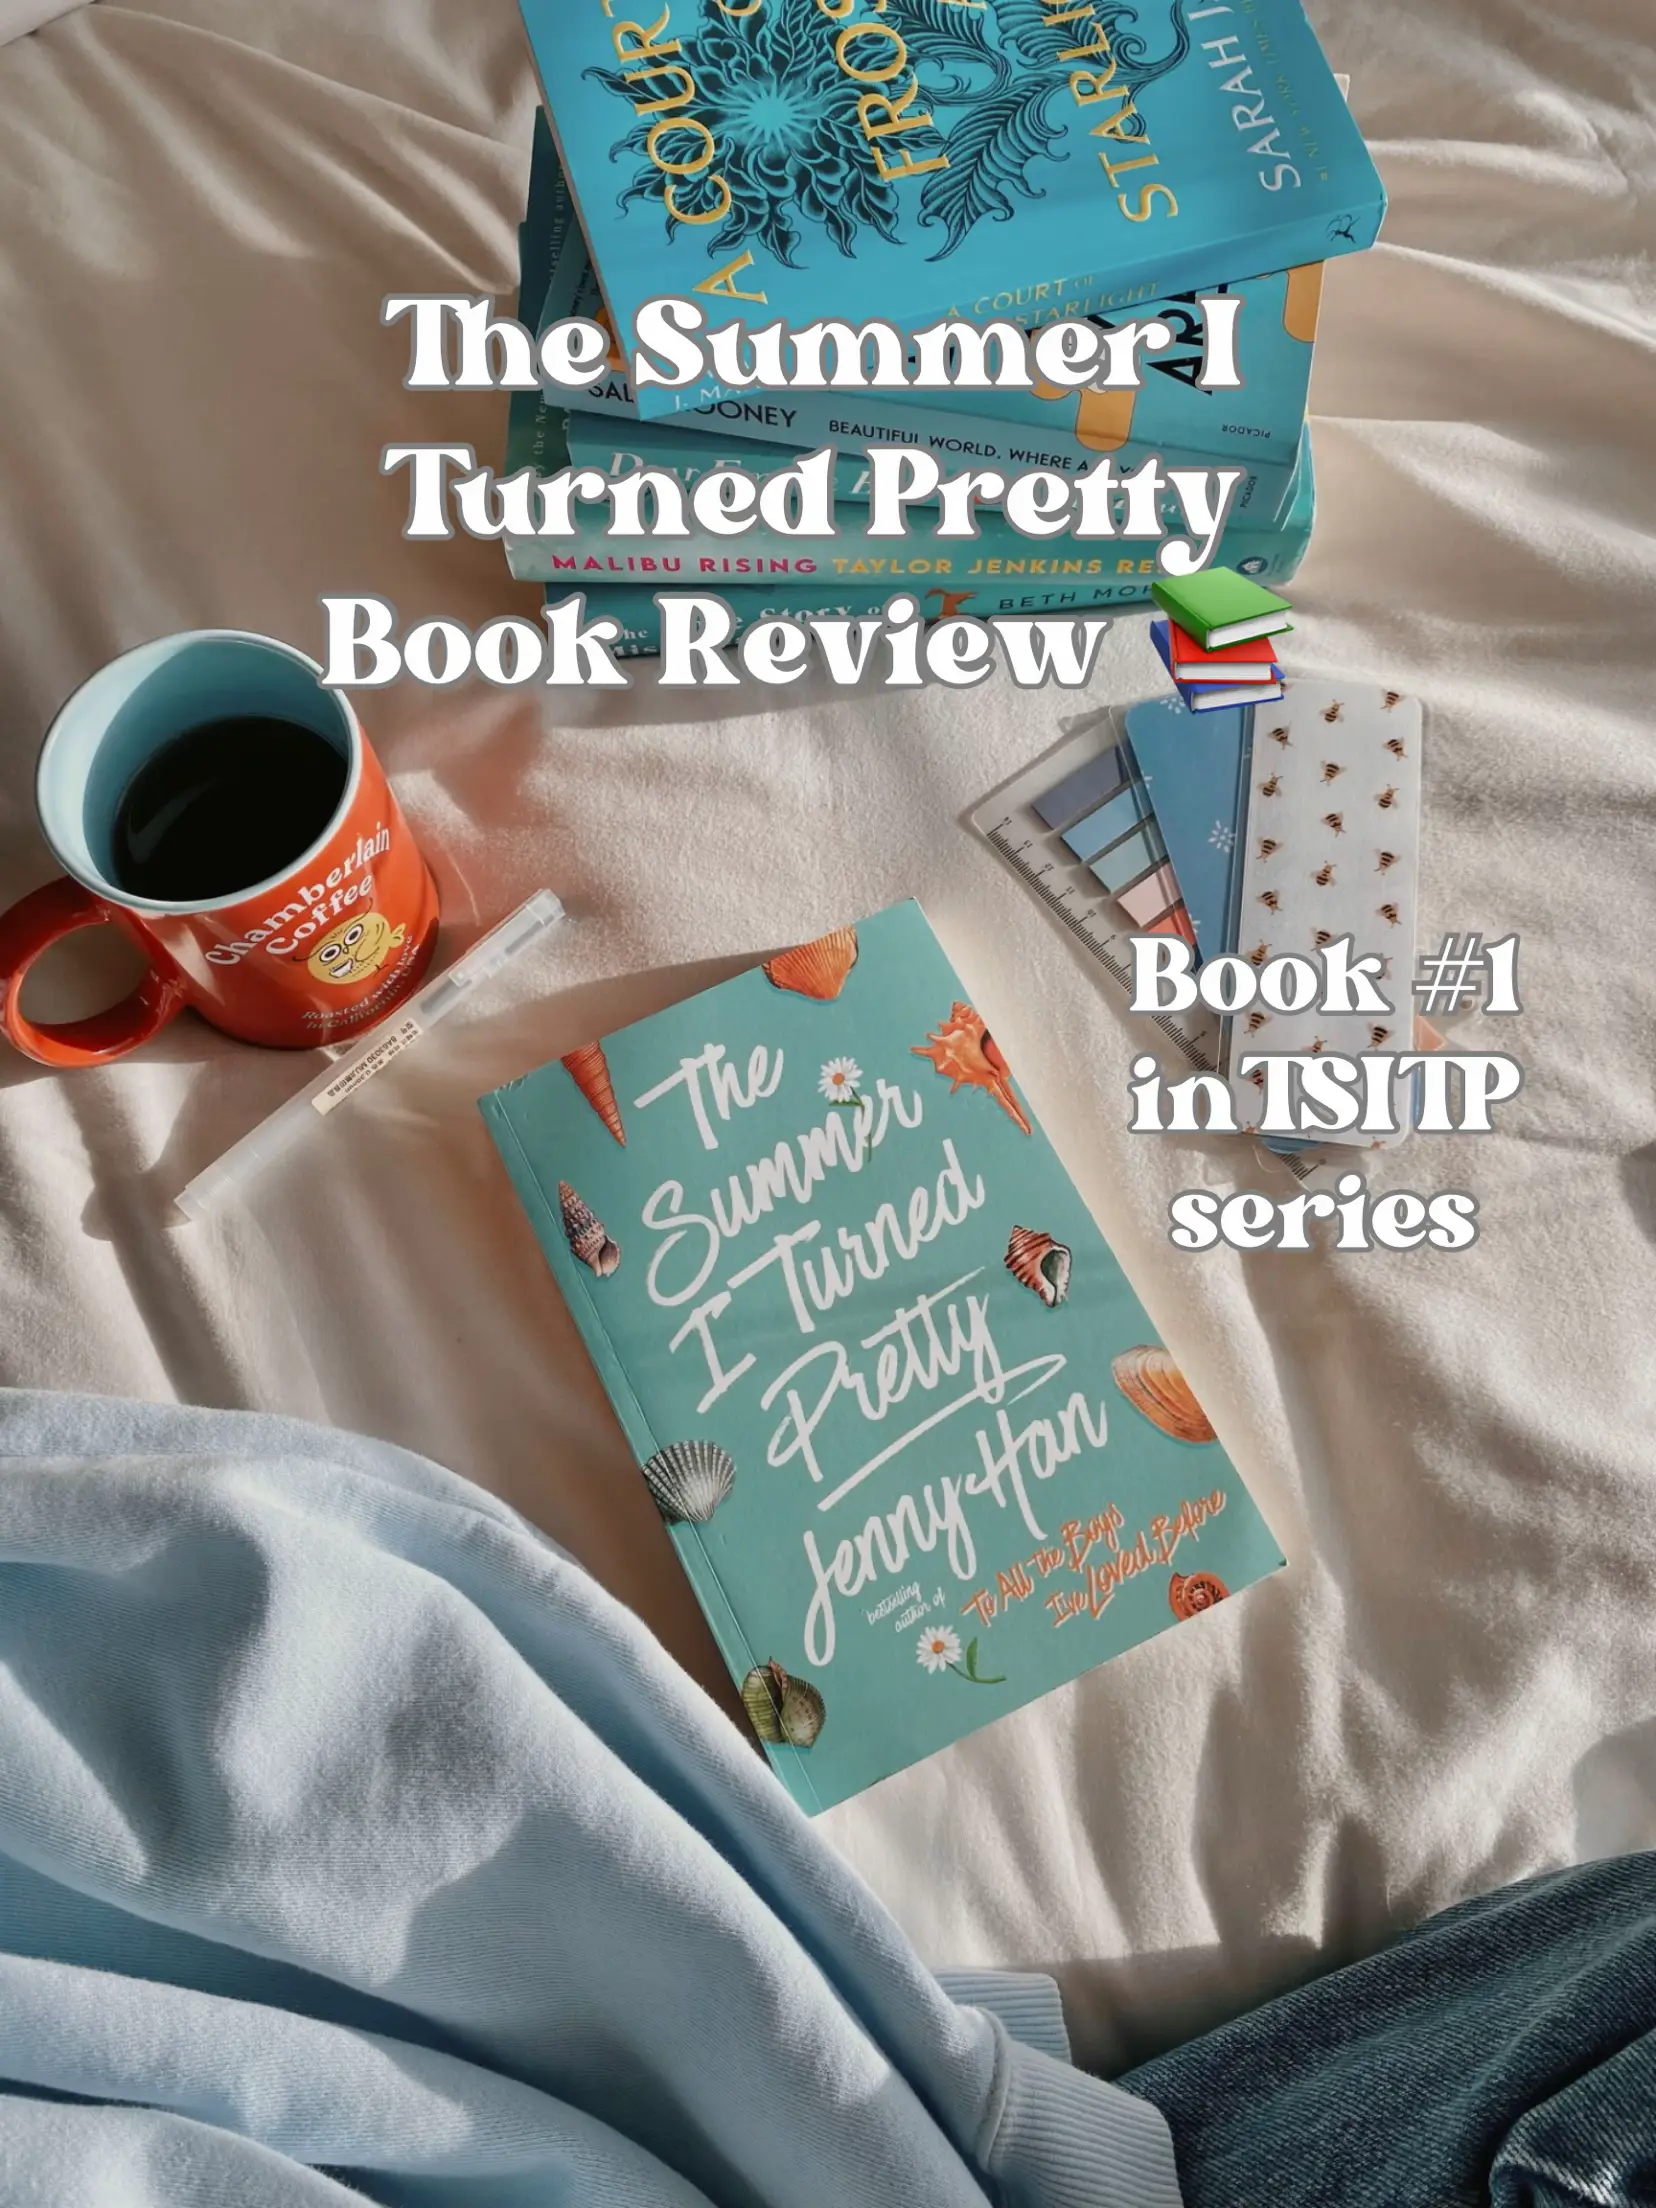 The Summer I Turned Pretty (Summer, #1) by Jenny Han